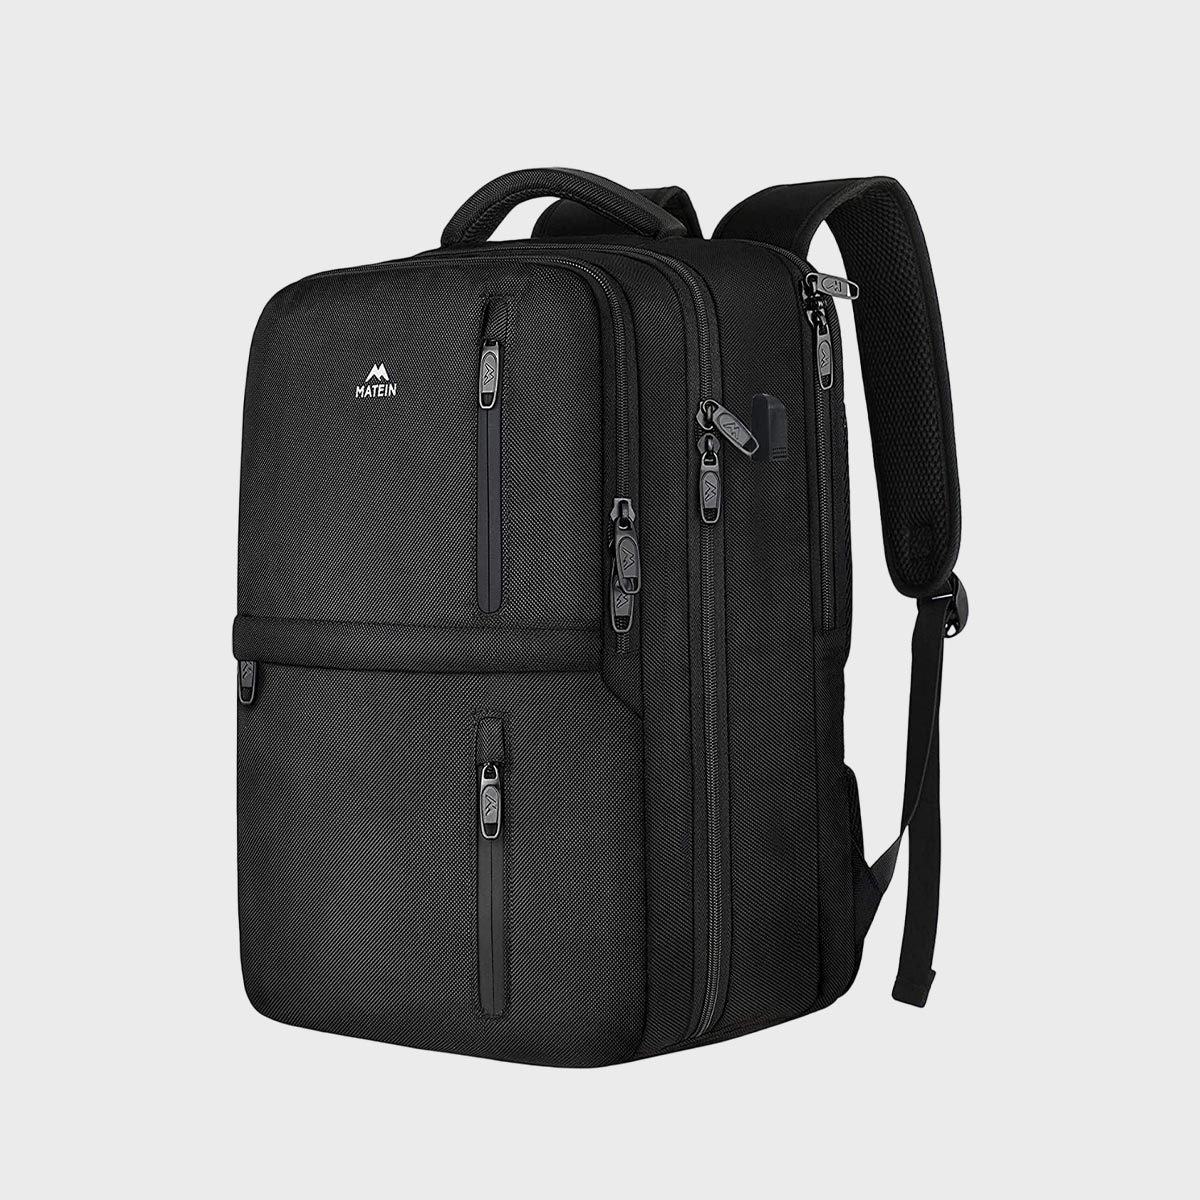 <h3 class="">Matein Travel Backpack</h3> <p>This wildly popular <a href="https://www.amazon.com/Backpack-Approved-Compartment-Anti-Theft-Lightweight/dp/B07NV3VZ76/" rel="noopener noreferrer">travel backpack</a> has more than 2,100 five-star ratings on Amazon. Here's why: The storage is exceptional. The two front organizer sections have spots for stashing keys, a wallet and a phone. The main compartment is roomy and ideal for daily essentials, and there's a separate padded space for laptops and other small tech devices. It's one of the best wallet-friendly <a href="https://www.rd.com/list/amazon-carry-on-luggage/" rel="noopener noreferrer">Amazon carry-on luggage</a> pieces.</p> <p>"<span>I travel 48 out of 52 weeks of the year and was looking for an inexpensive backpack that would be up for my travel challenges! Here it is! It’s perfect for my everyday tosses and bumps and being shoved into overhead bins on a plane. Fits nicely under the seat in front of me as long as I don’t pack it too full," shares five-star reviewer, <a href="https://www.amazon.com/gp/customer-reviews/RBTI26RQPXZT3/" rel="noopener">Emily C</a>.</span></p> <p><strong>Pros</strong></p> <ul> <li class="">Budget-friendly</li> <li class="">Durable water-resistant and anti-scratch fabric</li> <li class="">Hidden anti-theft back zippered pocket</li> <li class="">Multi-panel ventilated padded back provides support</li> <li>Separate padded laptop compartment</li> </ul> <p><strong>Cons</strong></p> <ul> <li class="">Includes a charging port, but not a portable charger</li> </ul> <p class="listicle-page__cta-button-shop"><a class="shop-btn" href="https://www.amazon.com/Backpack-Approved-Compartment-Anti-Theft-Lightweight/dp/B07NV3VZ76/">Shop Now</a></p>